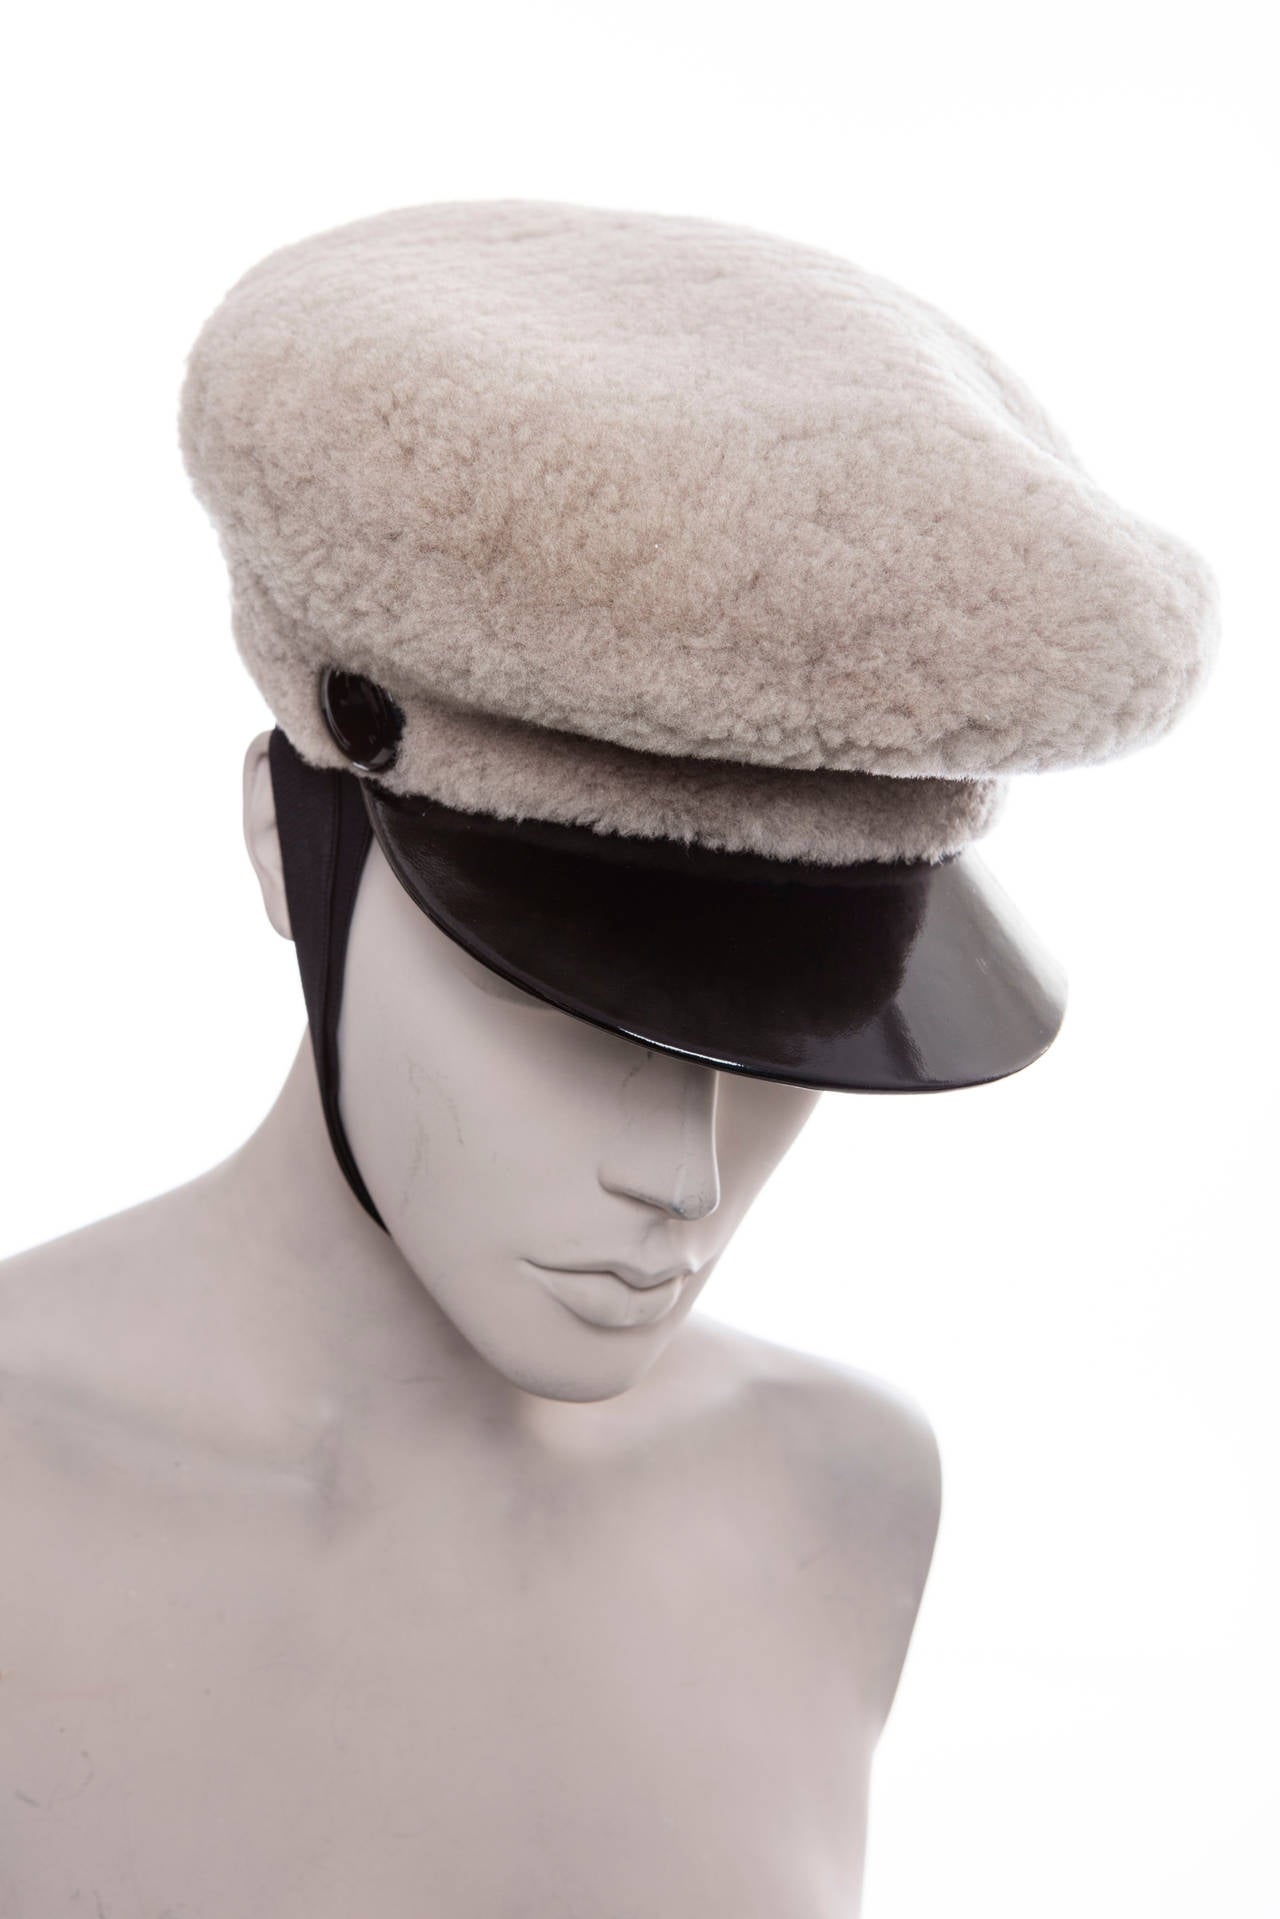 Marc Jacobs for Louis Vuitton, Fall 2010, grey wool night porter hat with black patent leather trim.

Circumference 24.5